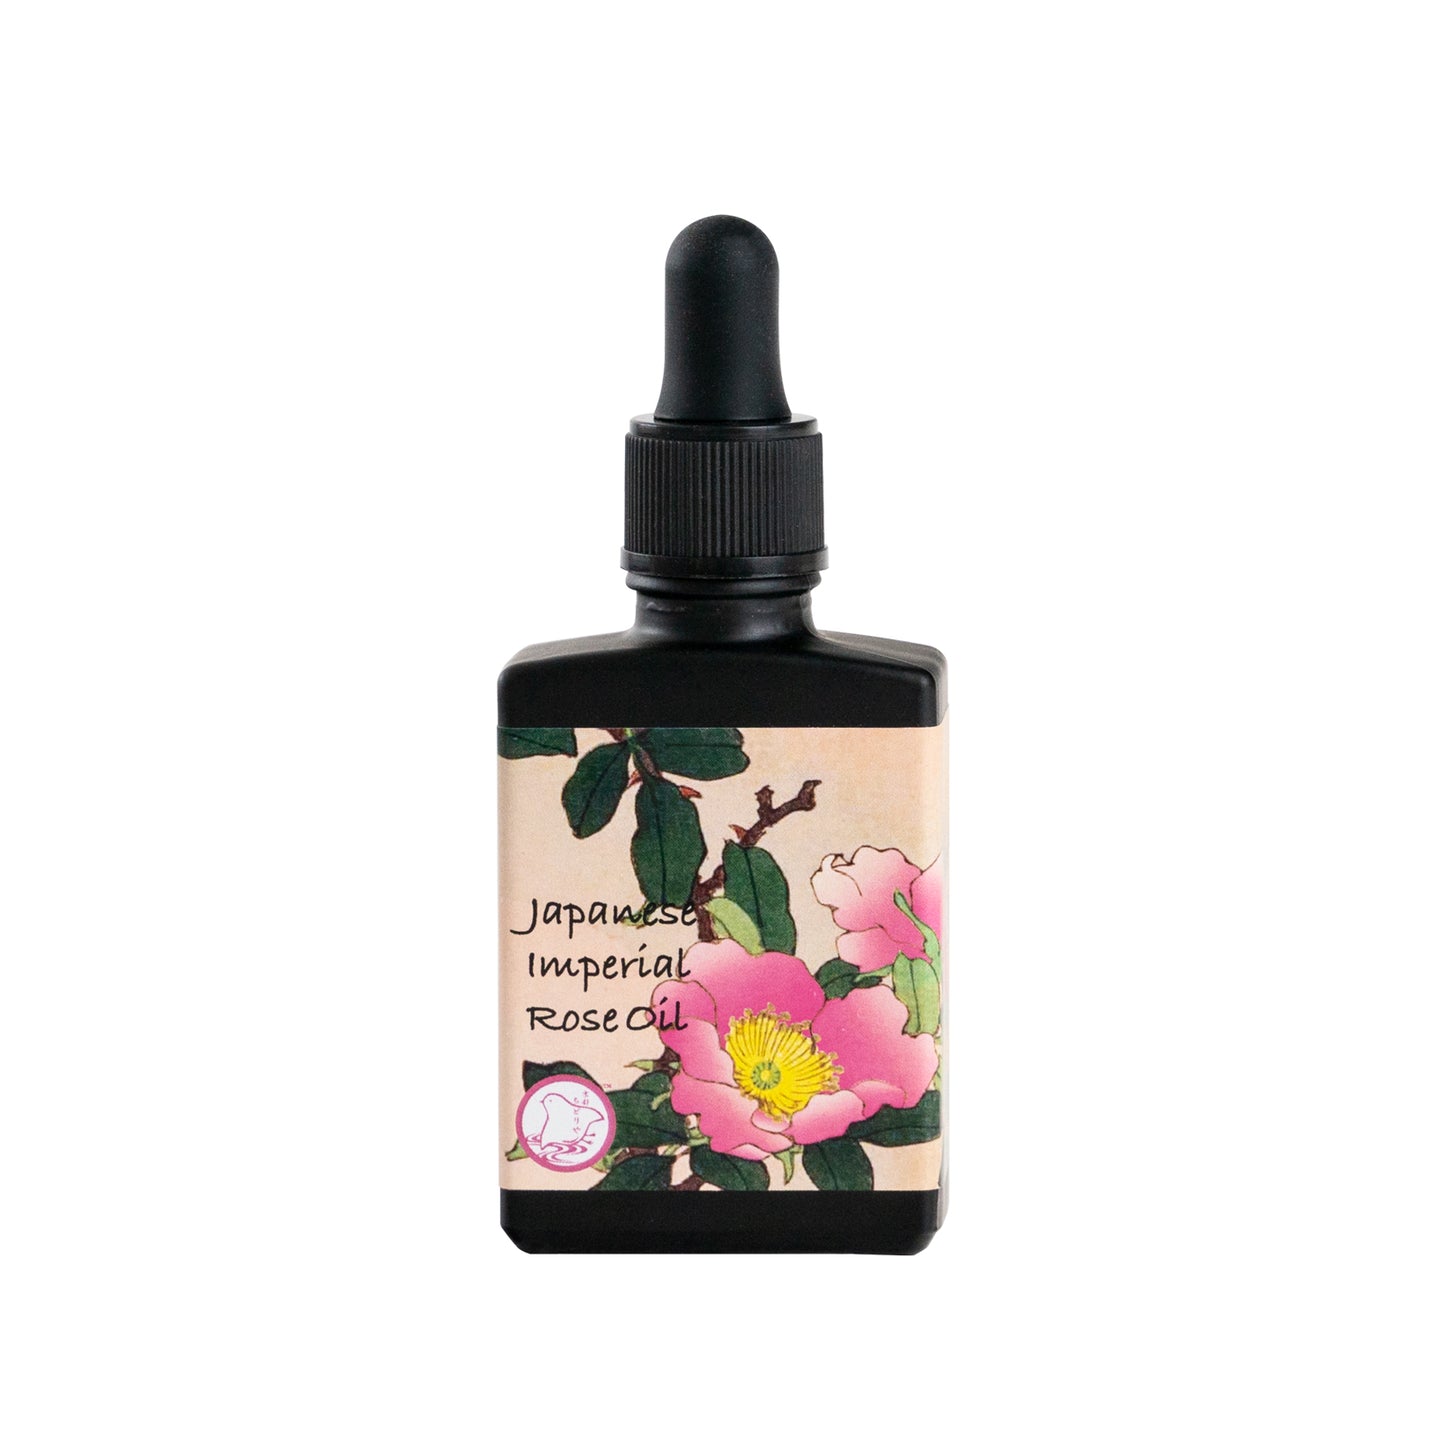 Primary image of Japanese Imperial Rose Oil